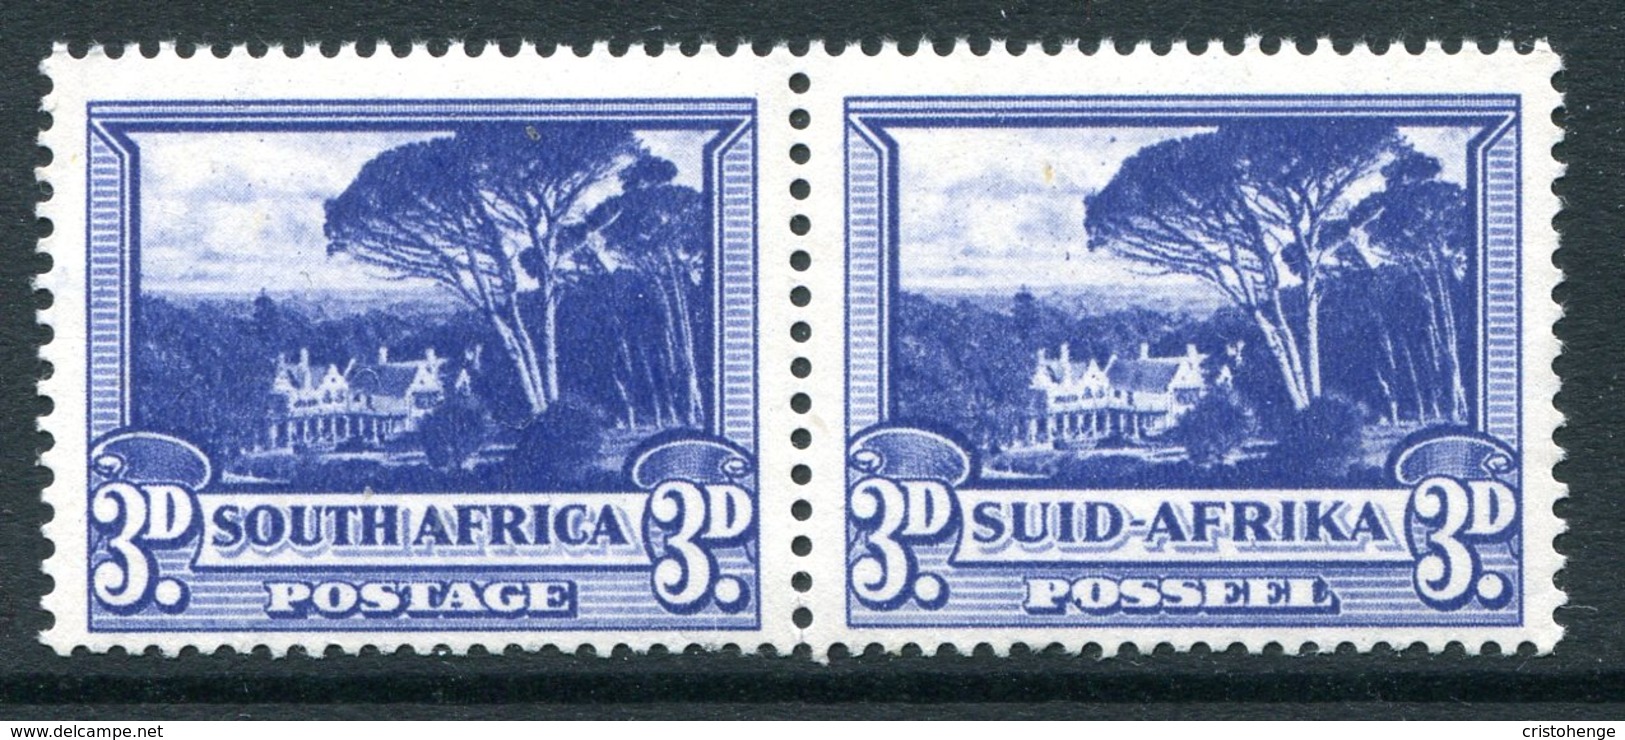 South Africa 1947-54 Screened Printing - 3d Groot Schuur - Blue - HM (SG 117a) - Unused Stamps